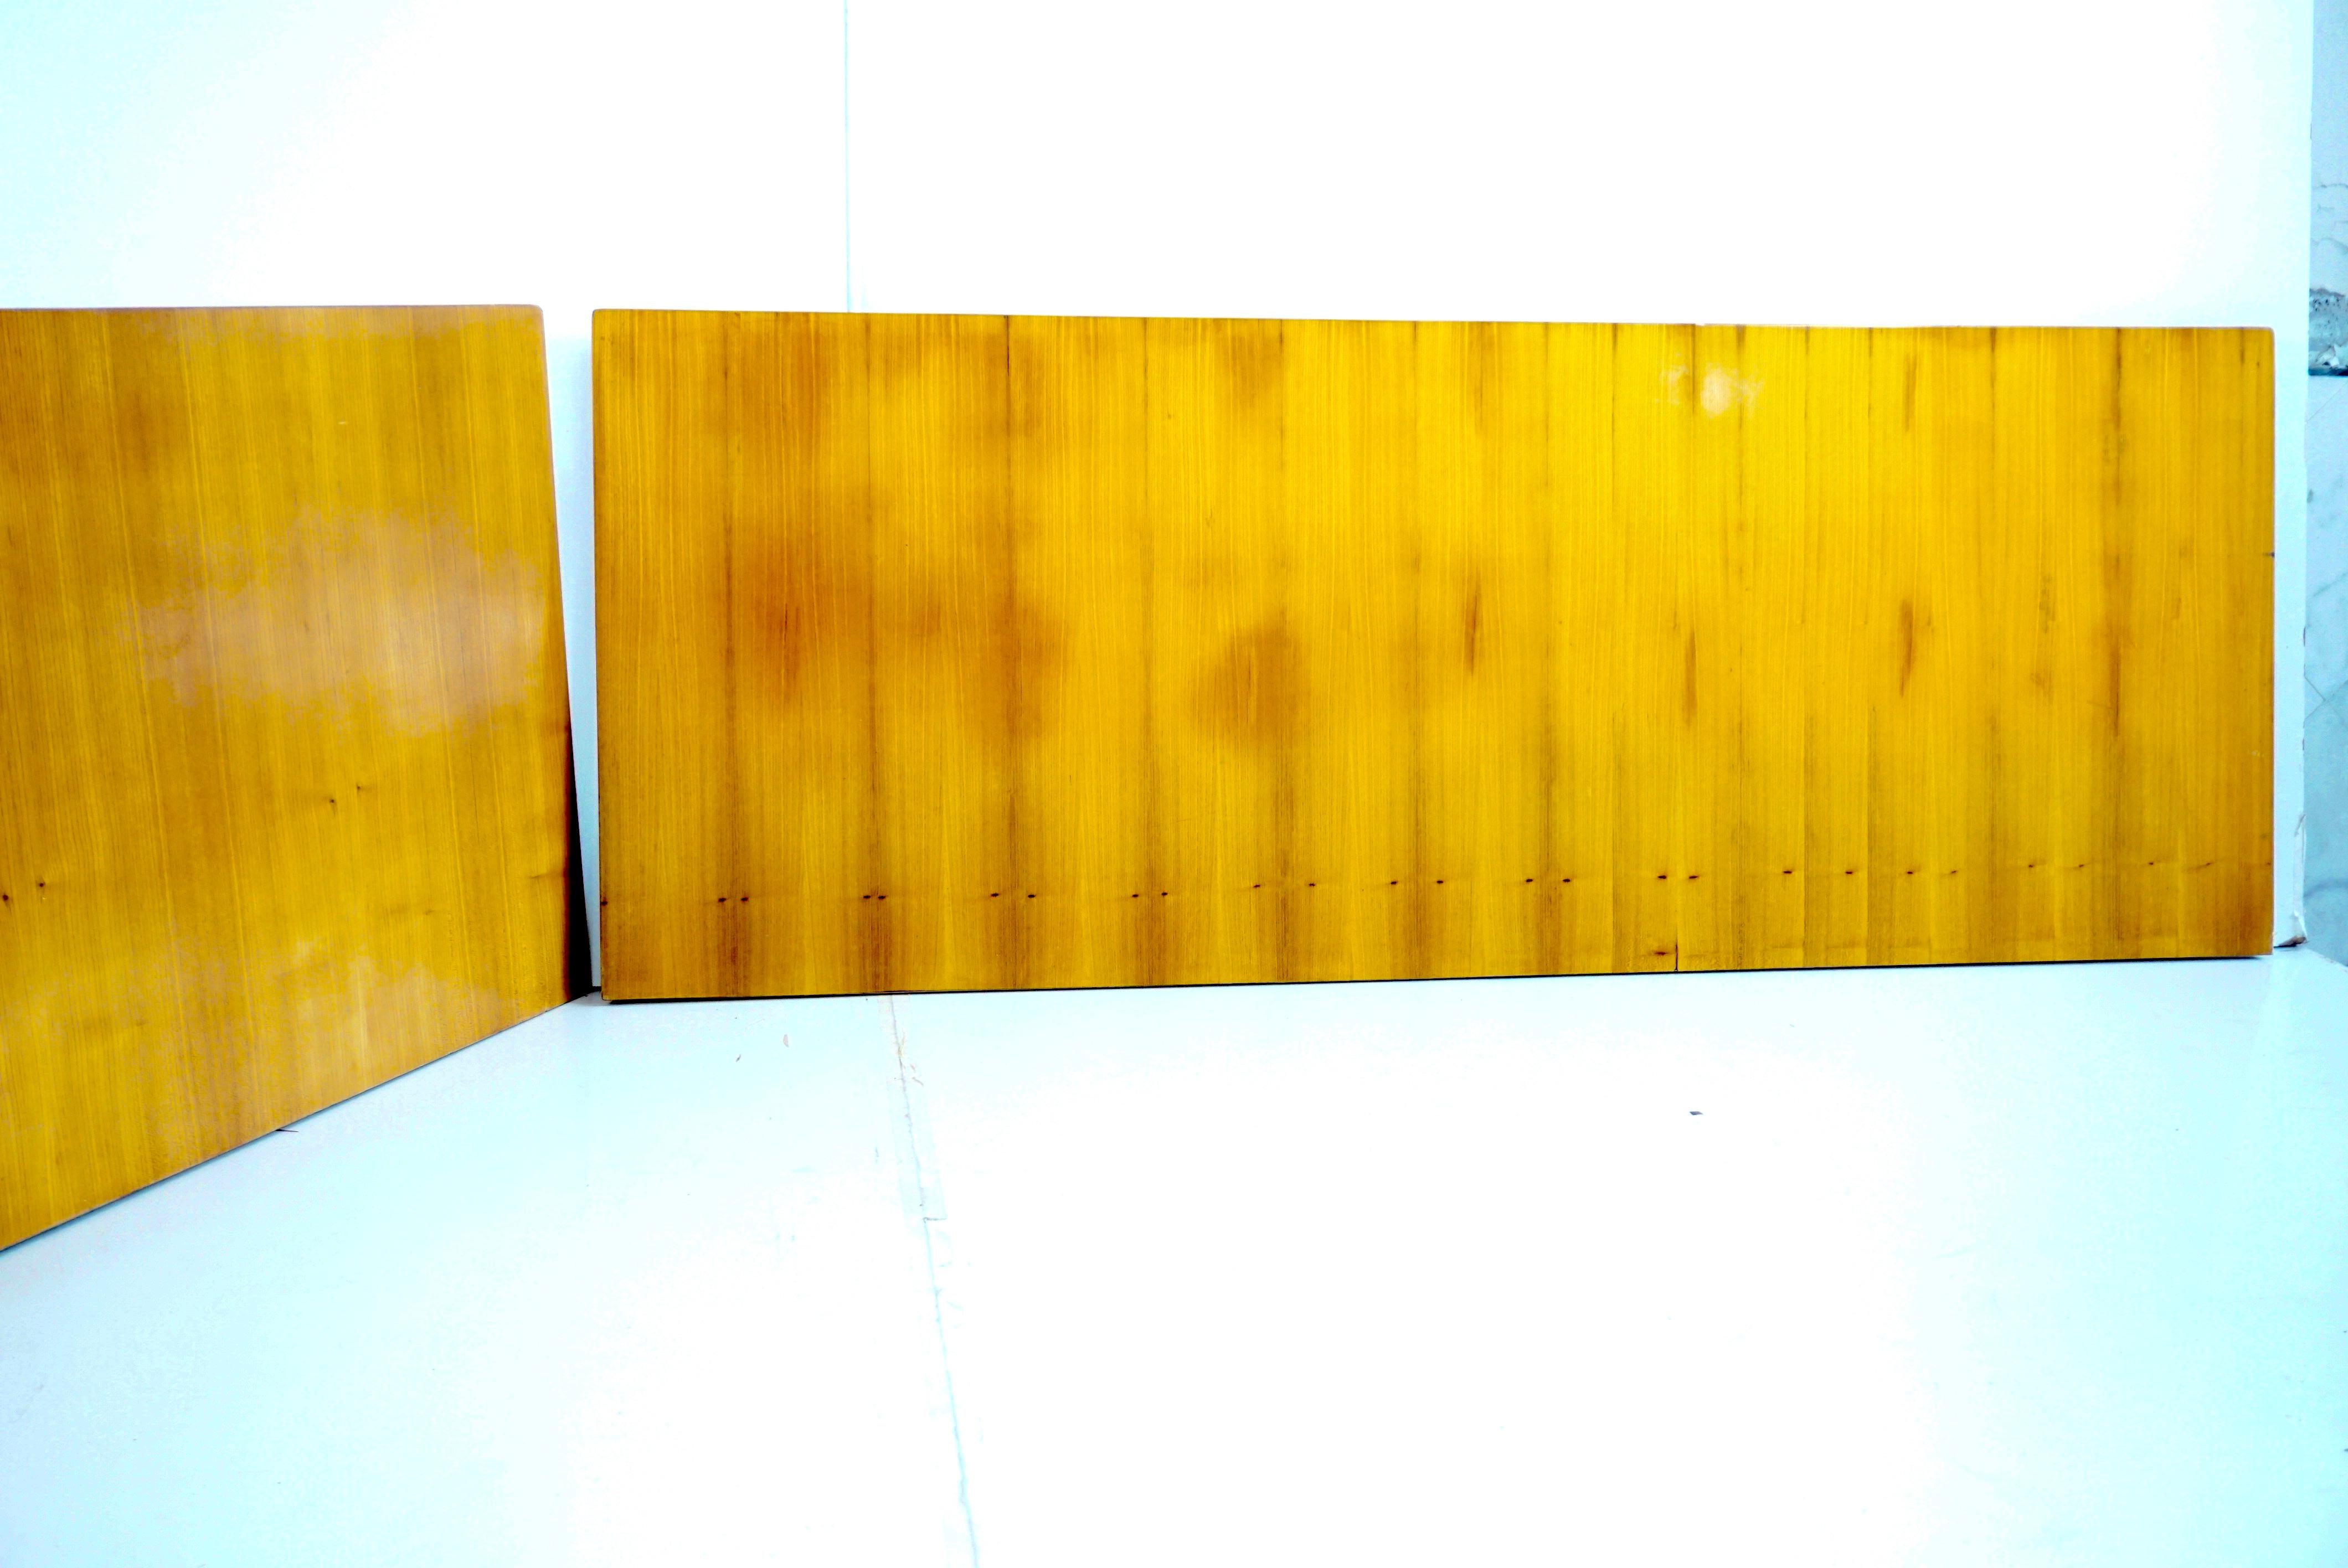 Pair of Large Gio Ponti Cherrywood Boiserie Panels from Hotel Royal, Naples 1955 In Good Condition For Sale In Rome, IT